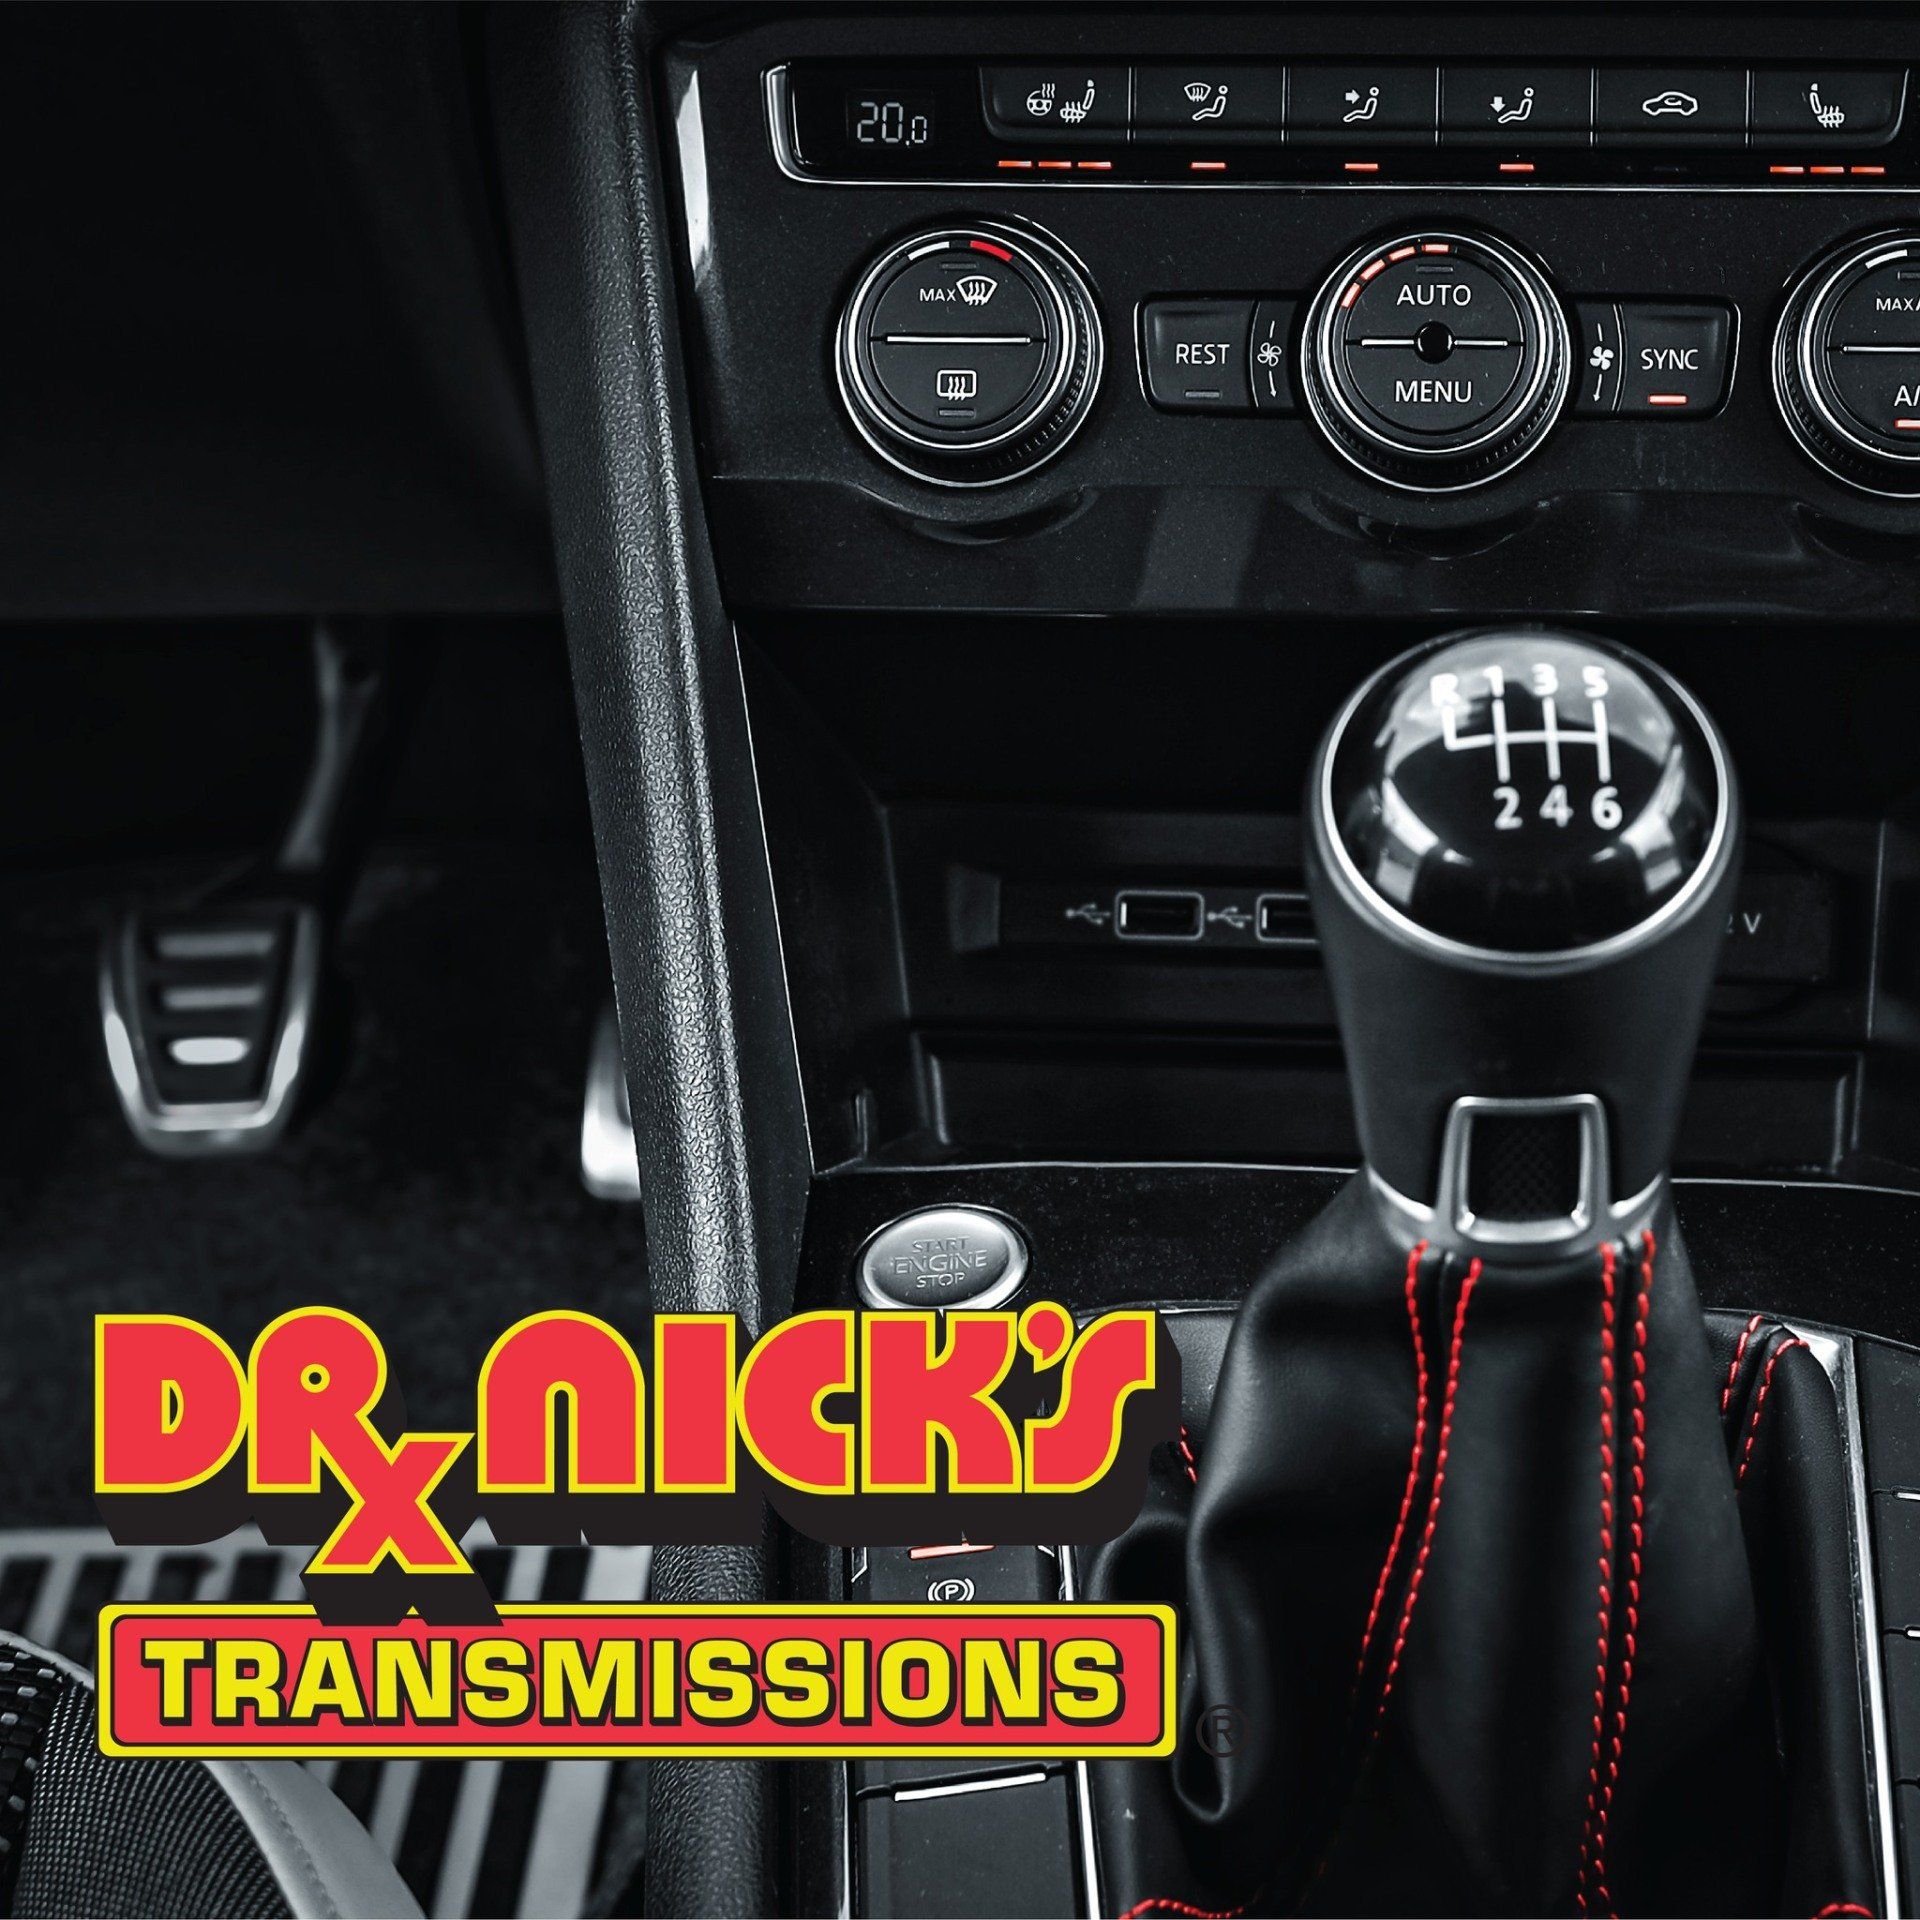 About Dr. Nick's Transmissions